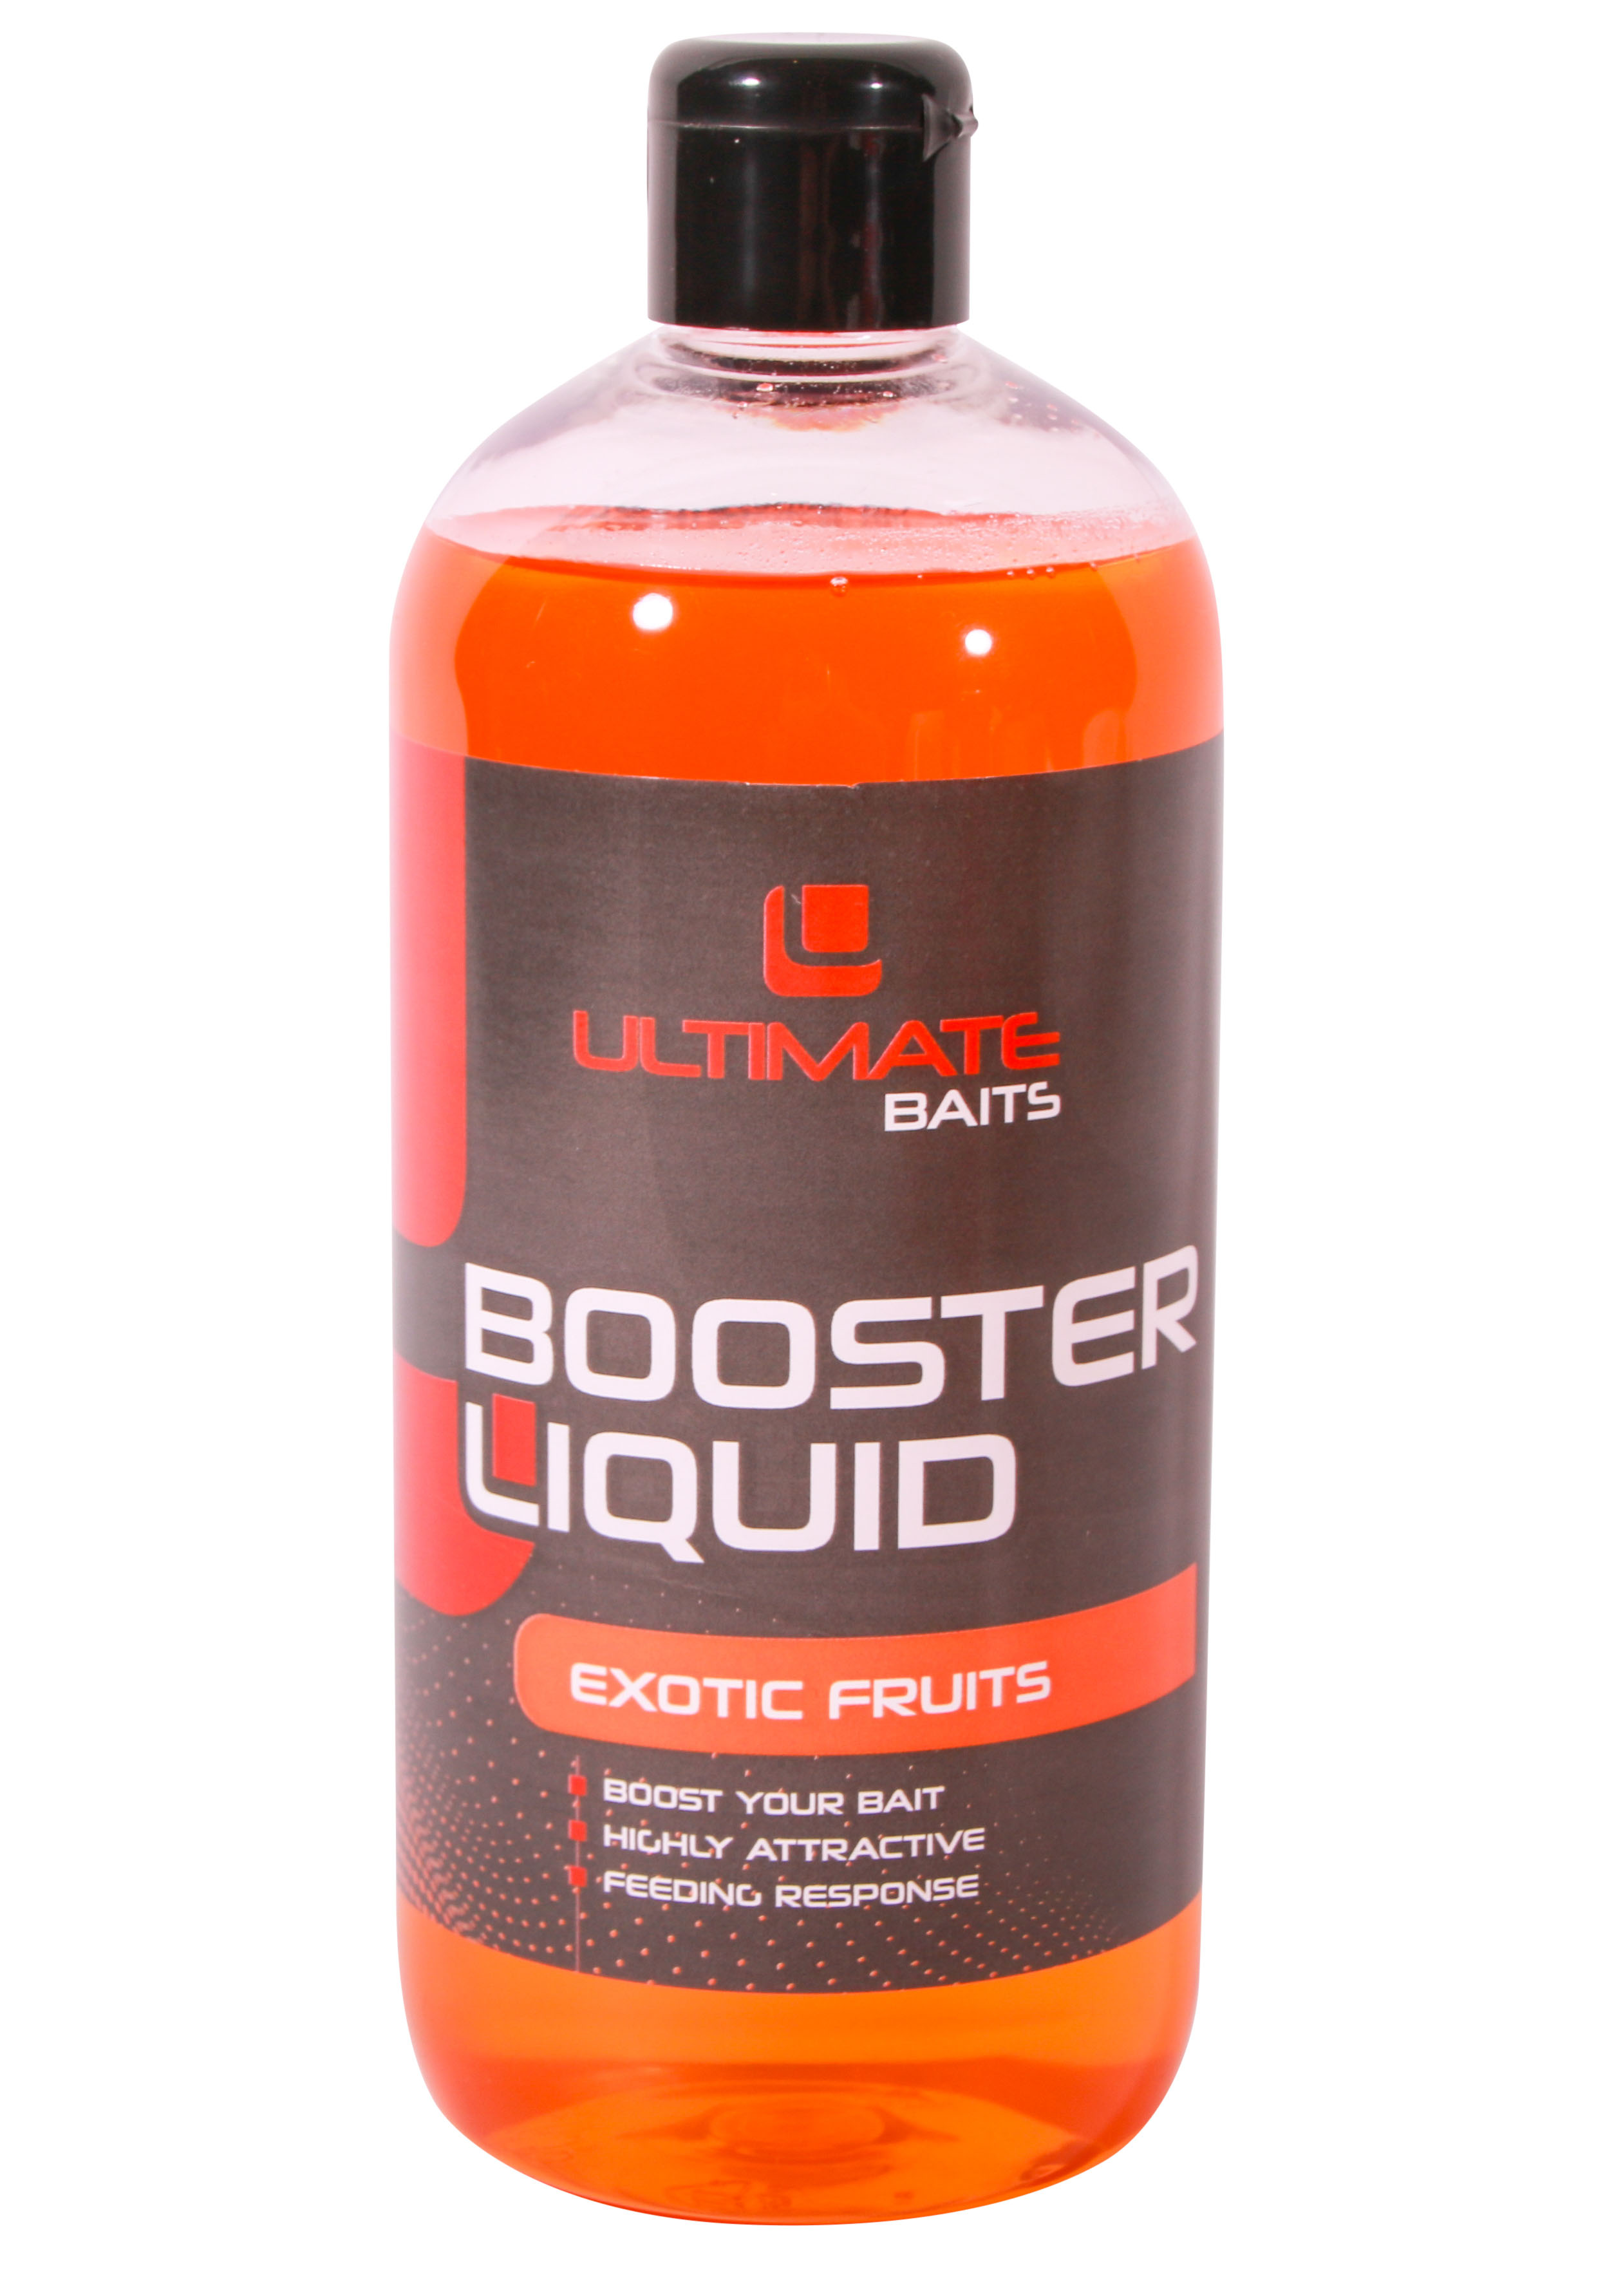 Ultimate Baits Booster Liquid 500ml - Exotic Fruits